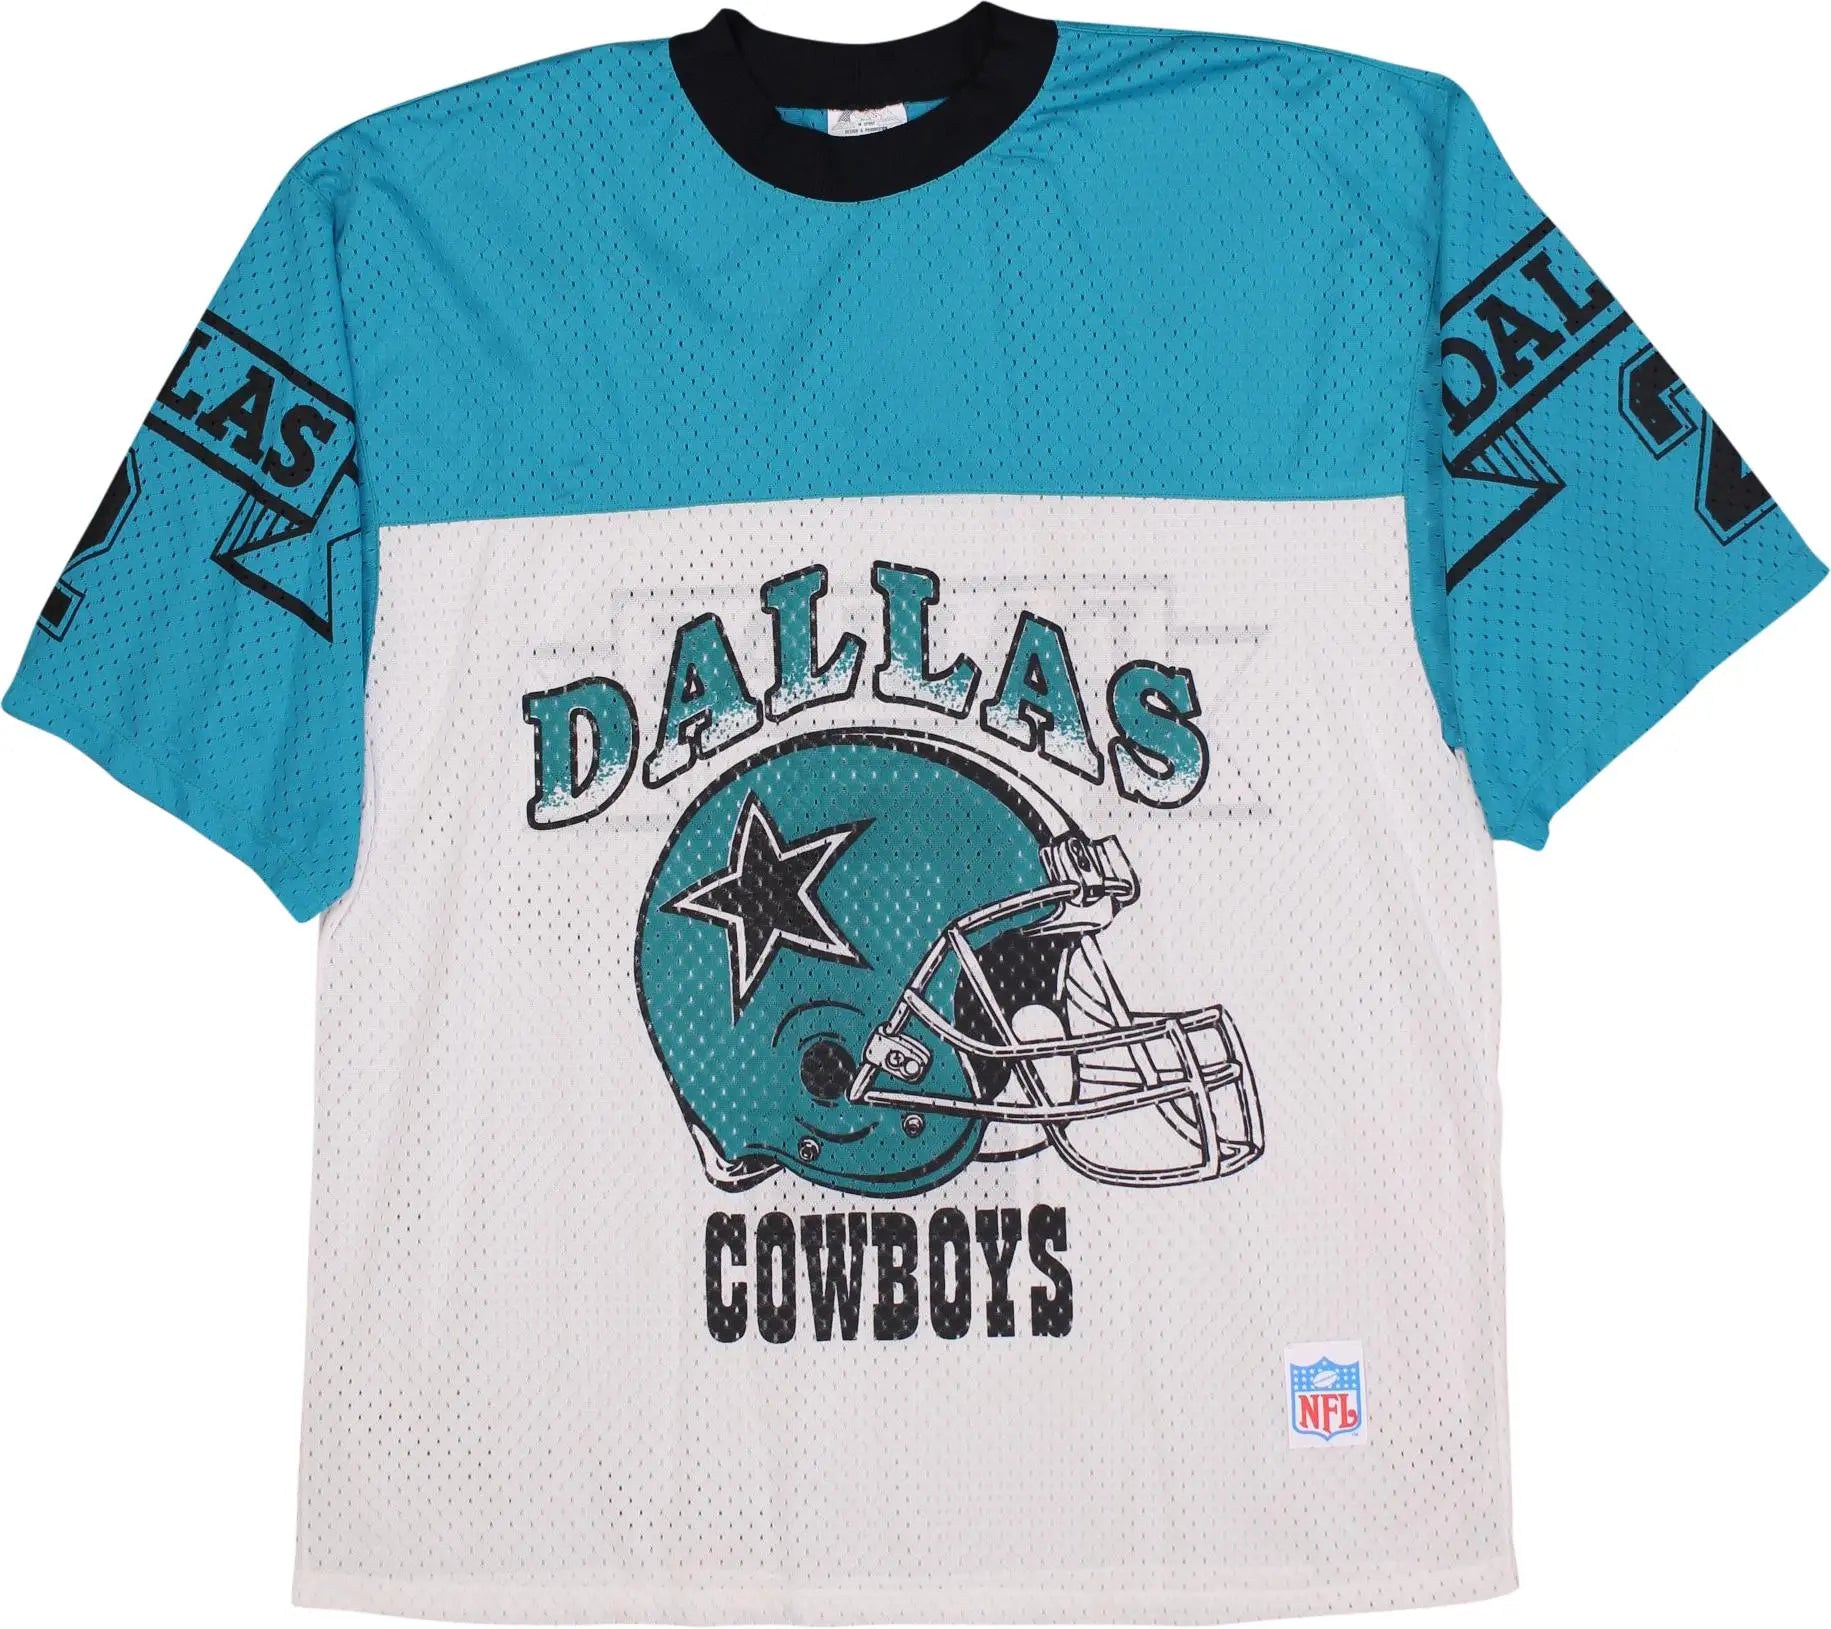 M Sport - NFL Dallas Cowboys T-shirt- ThriftTale.com - Vintage and second handclothing